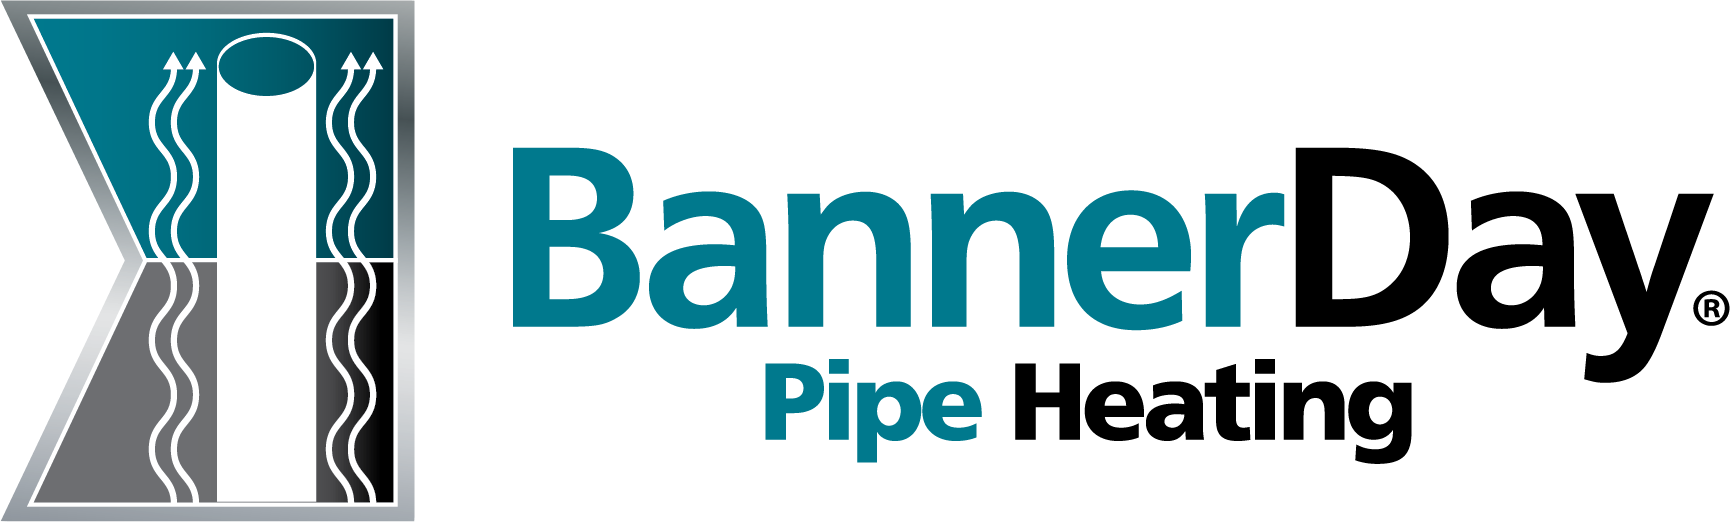 Banner_Day_Pipe_Heating